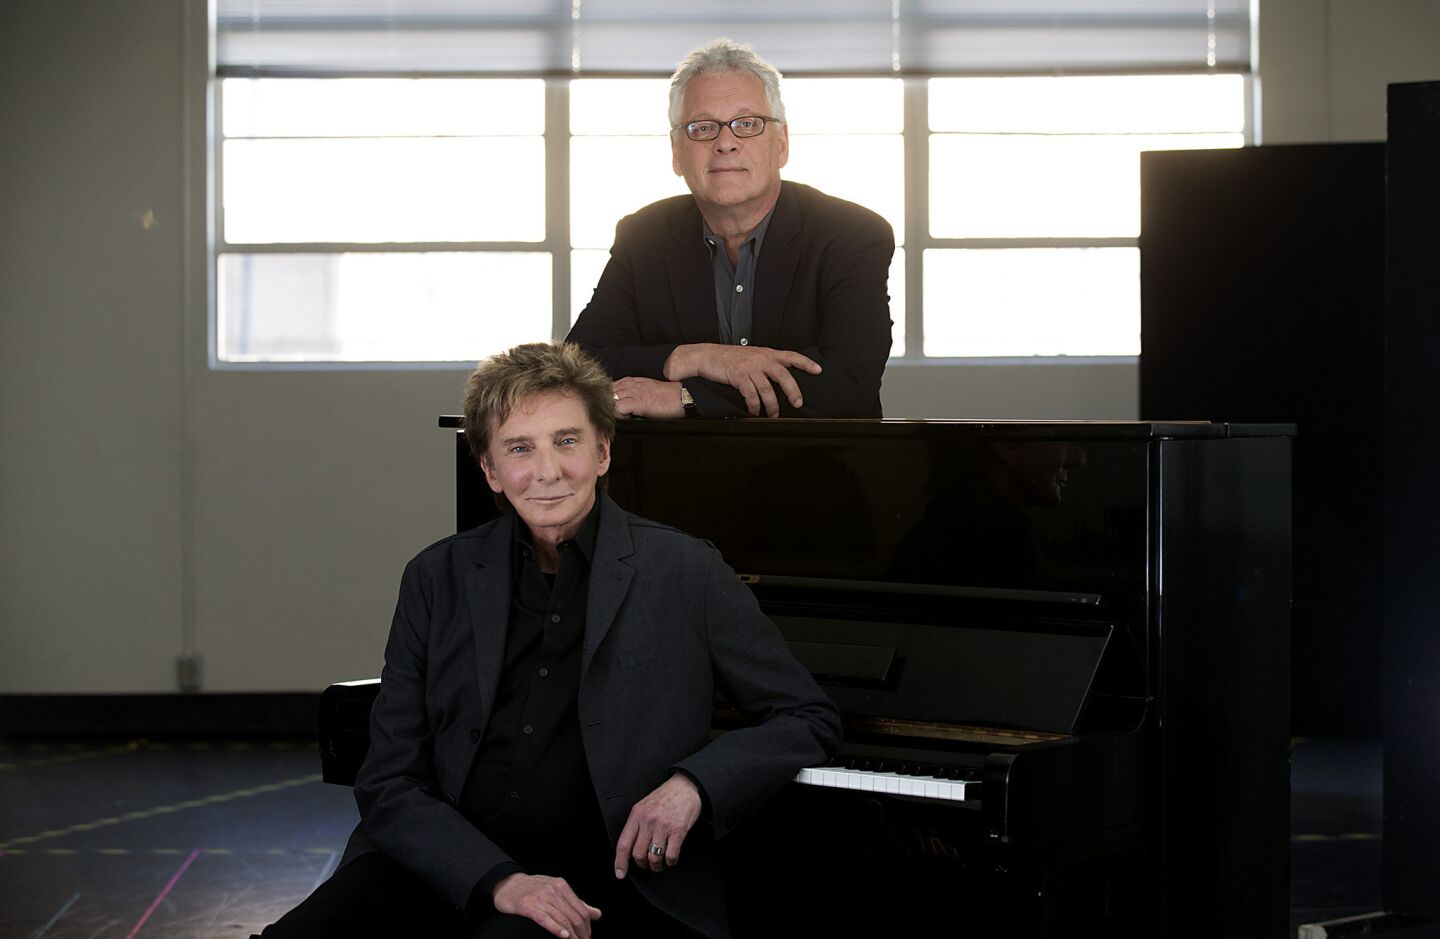 Arts and culture in pictures by The Times | Barry Manilow and Bruce Sussman